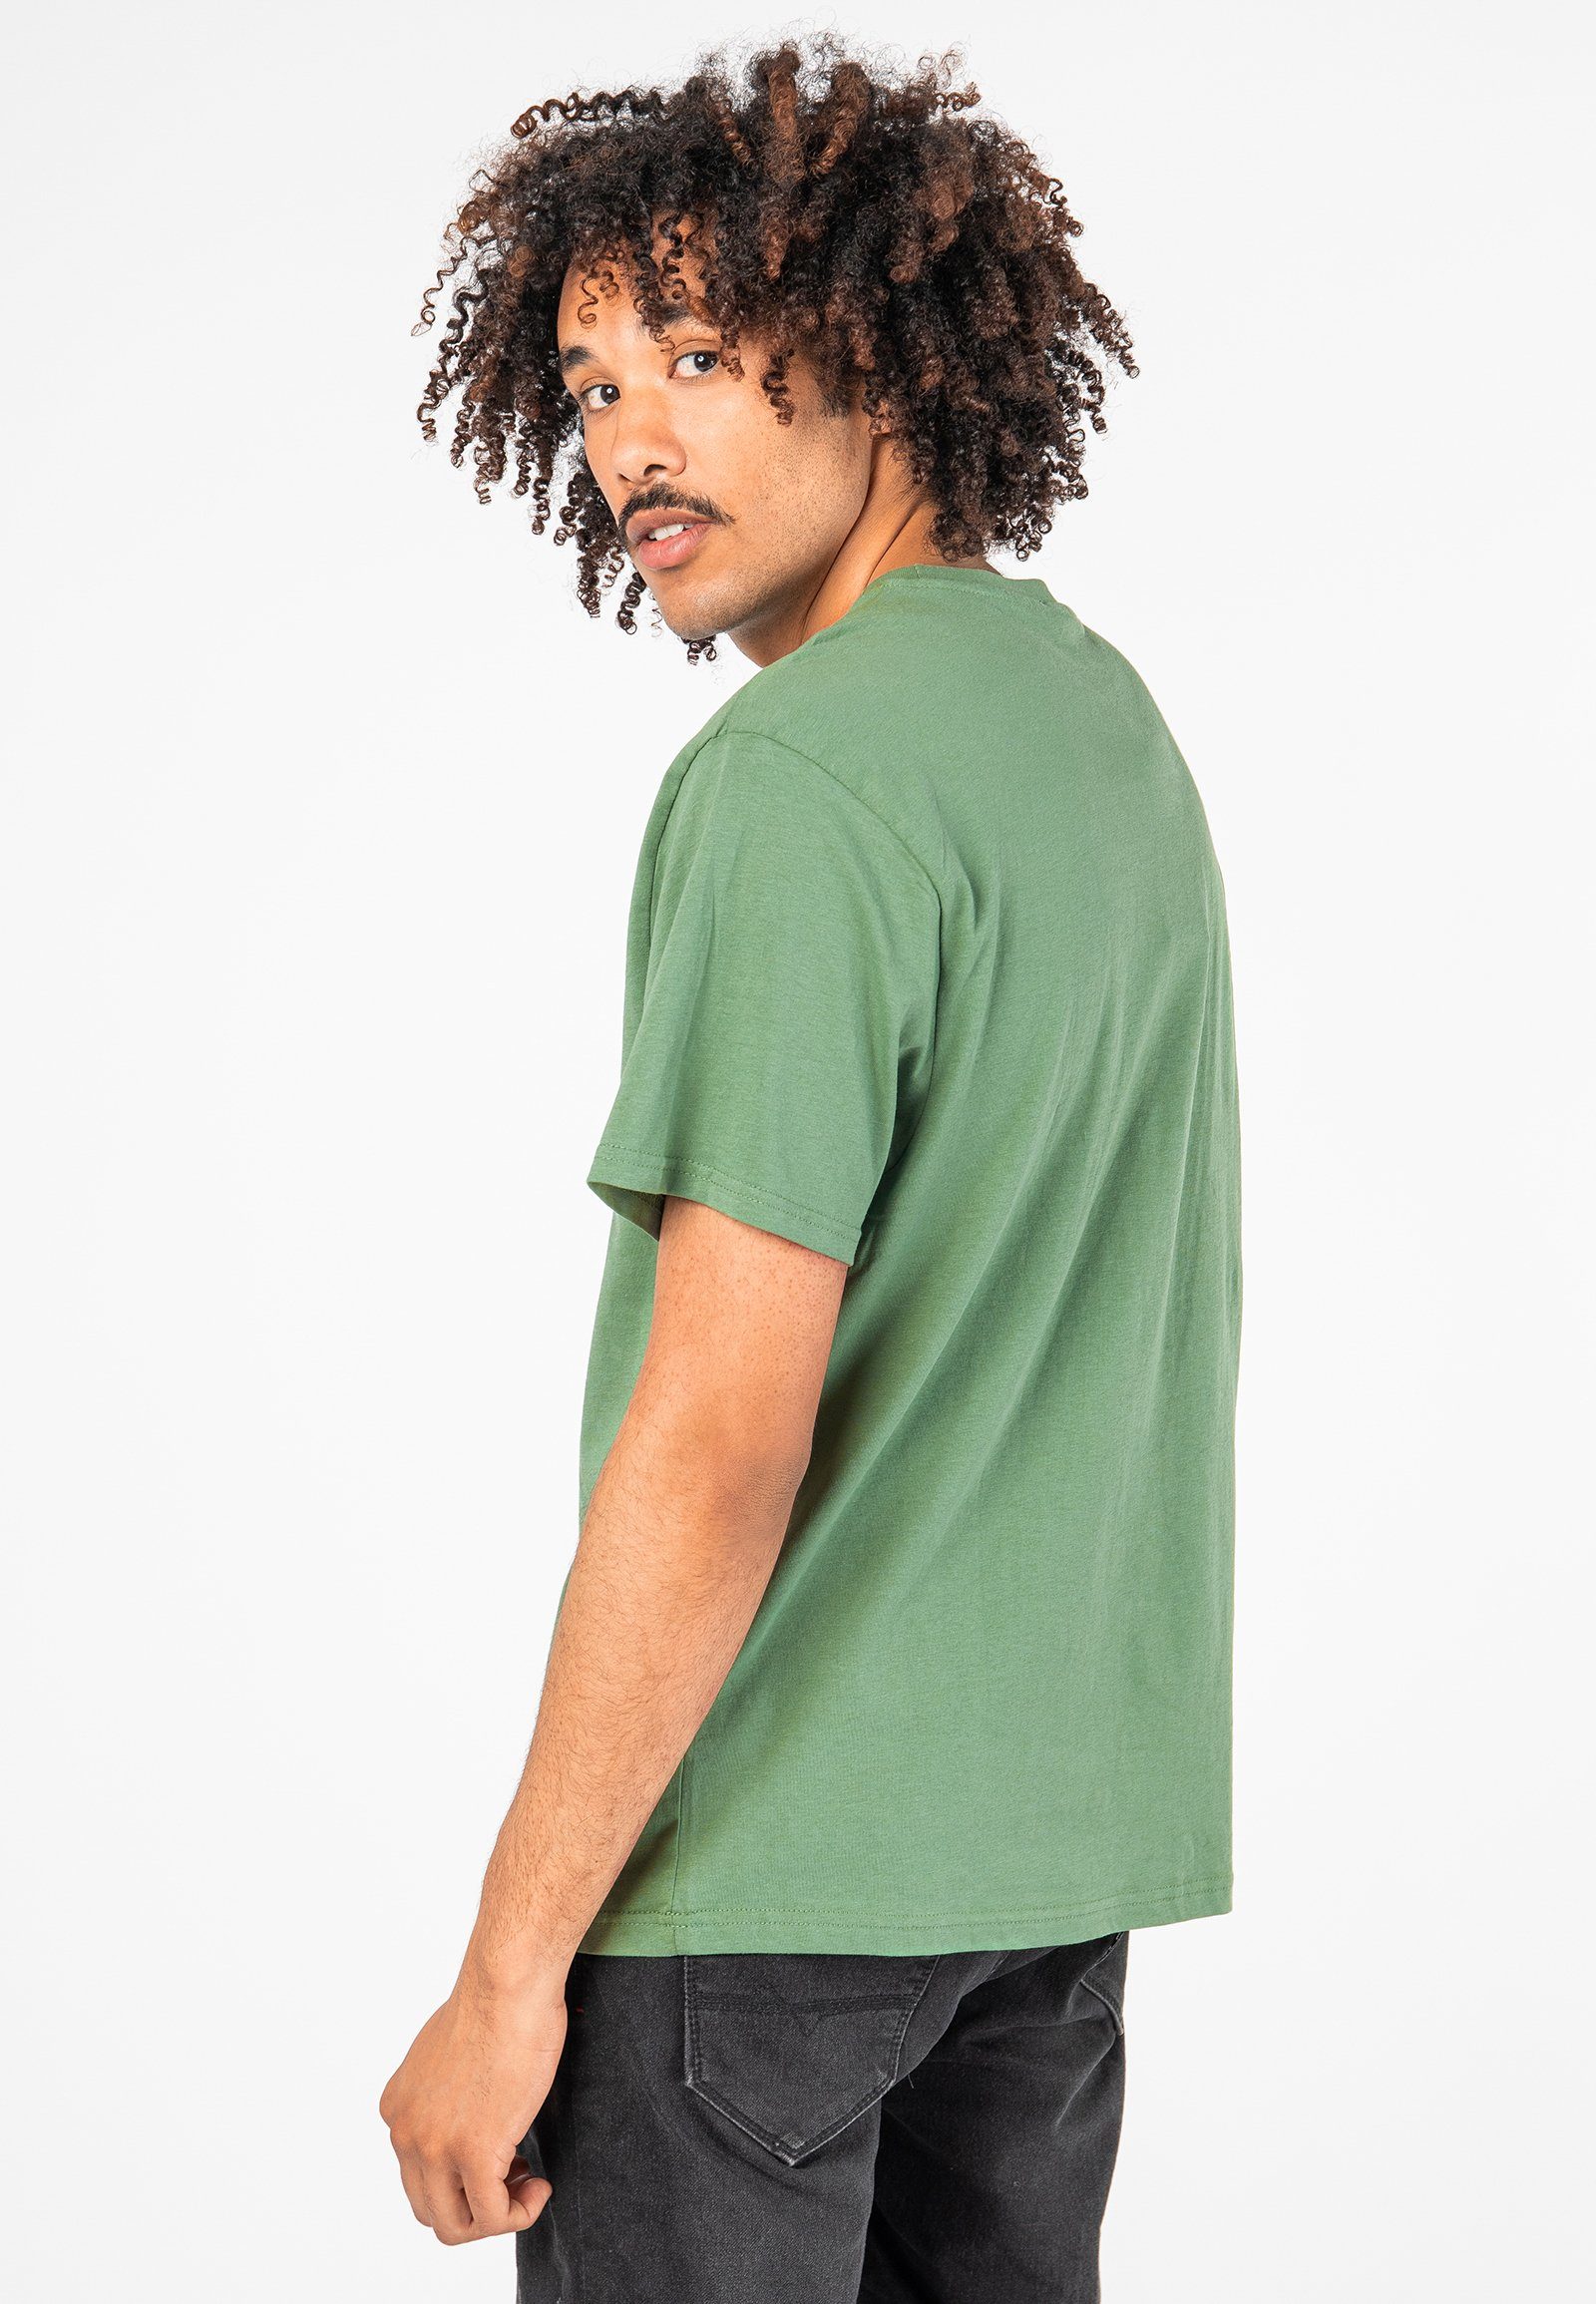 green Print mit T-Shirt SUBLEVEL T-Shirt Sommer